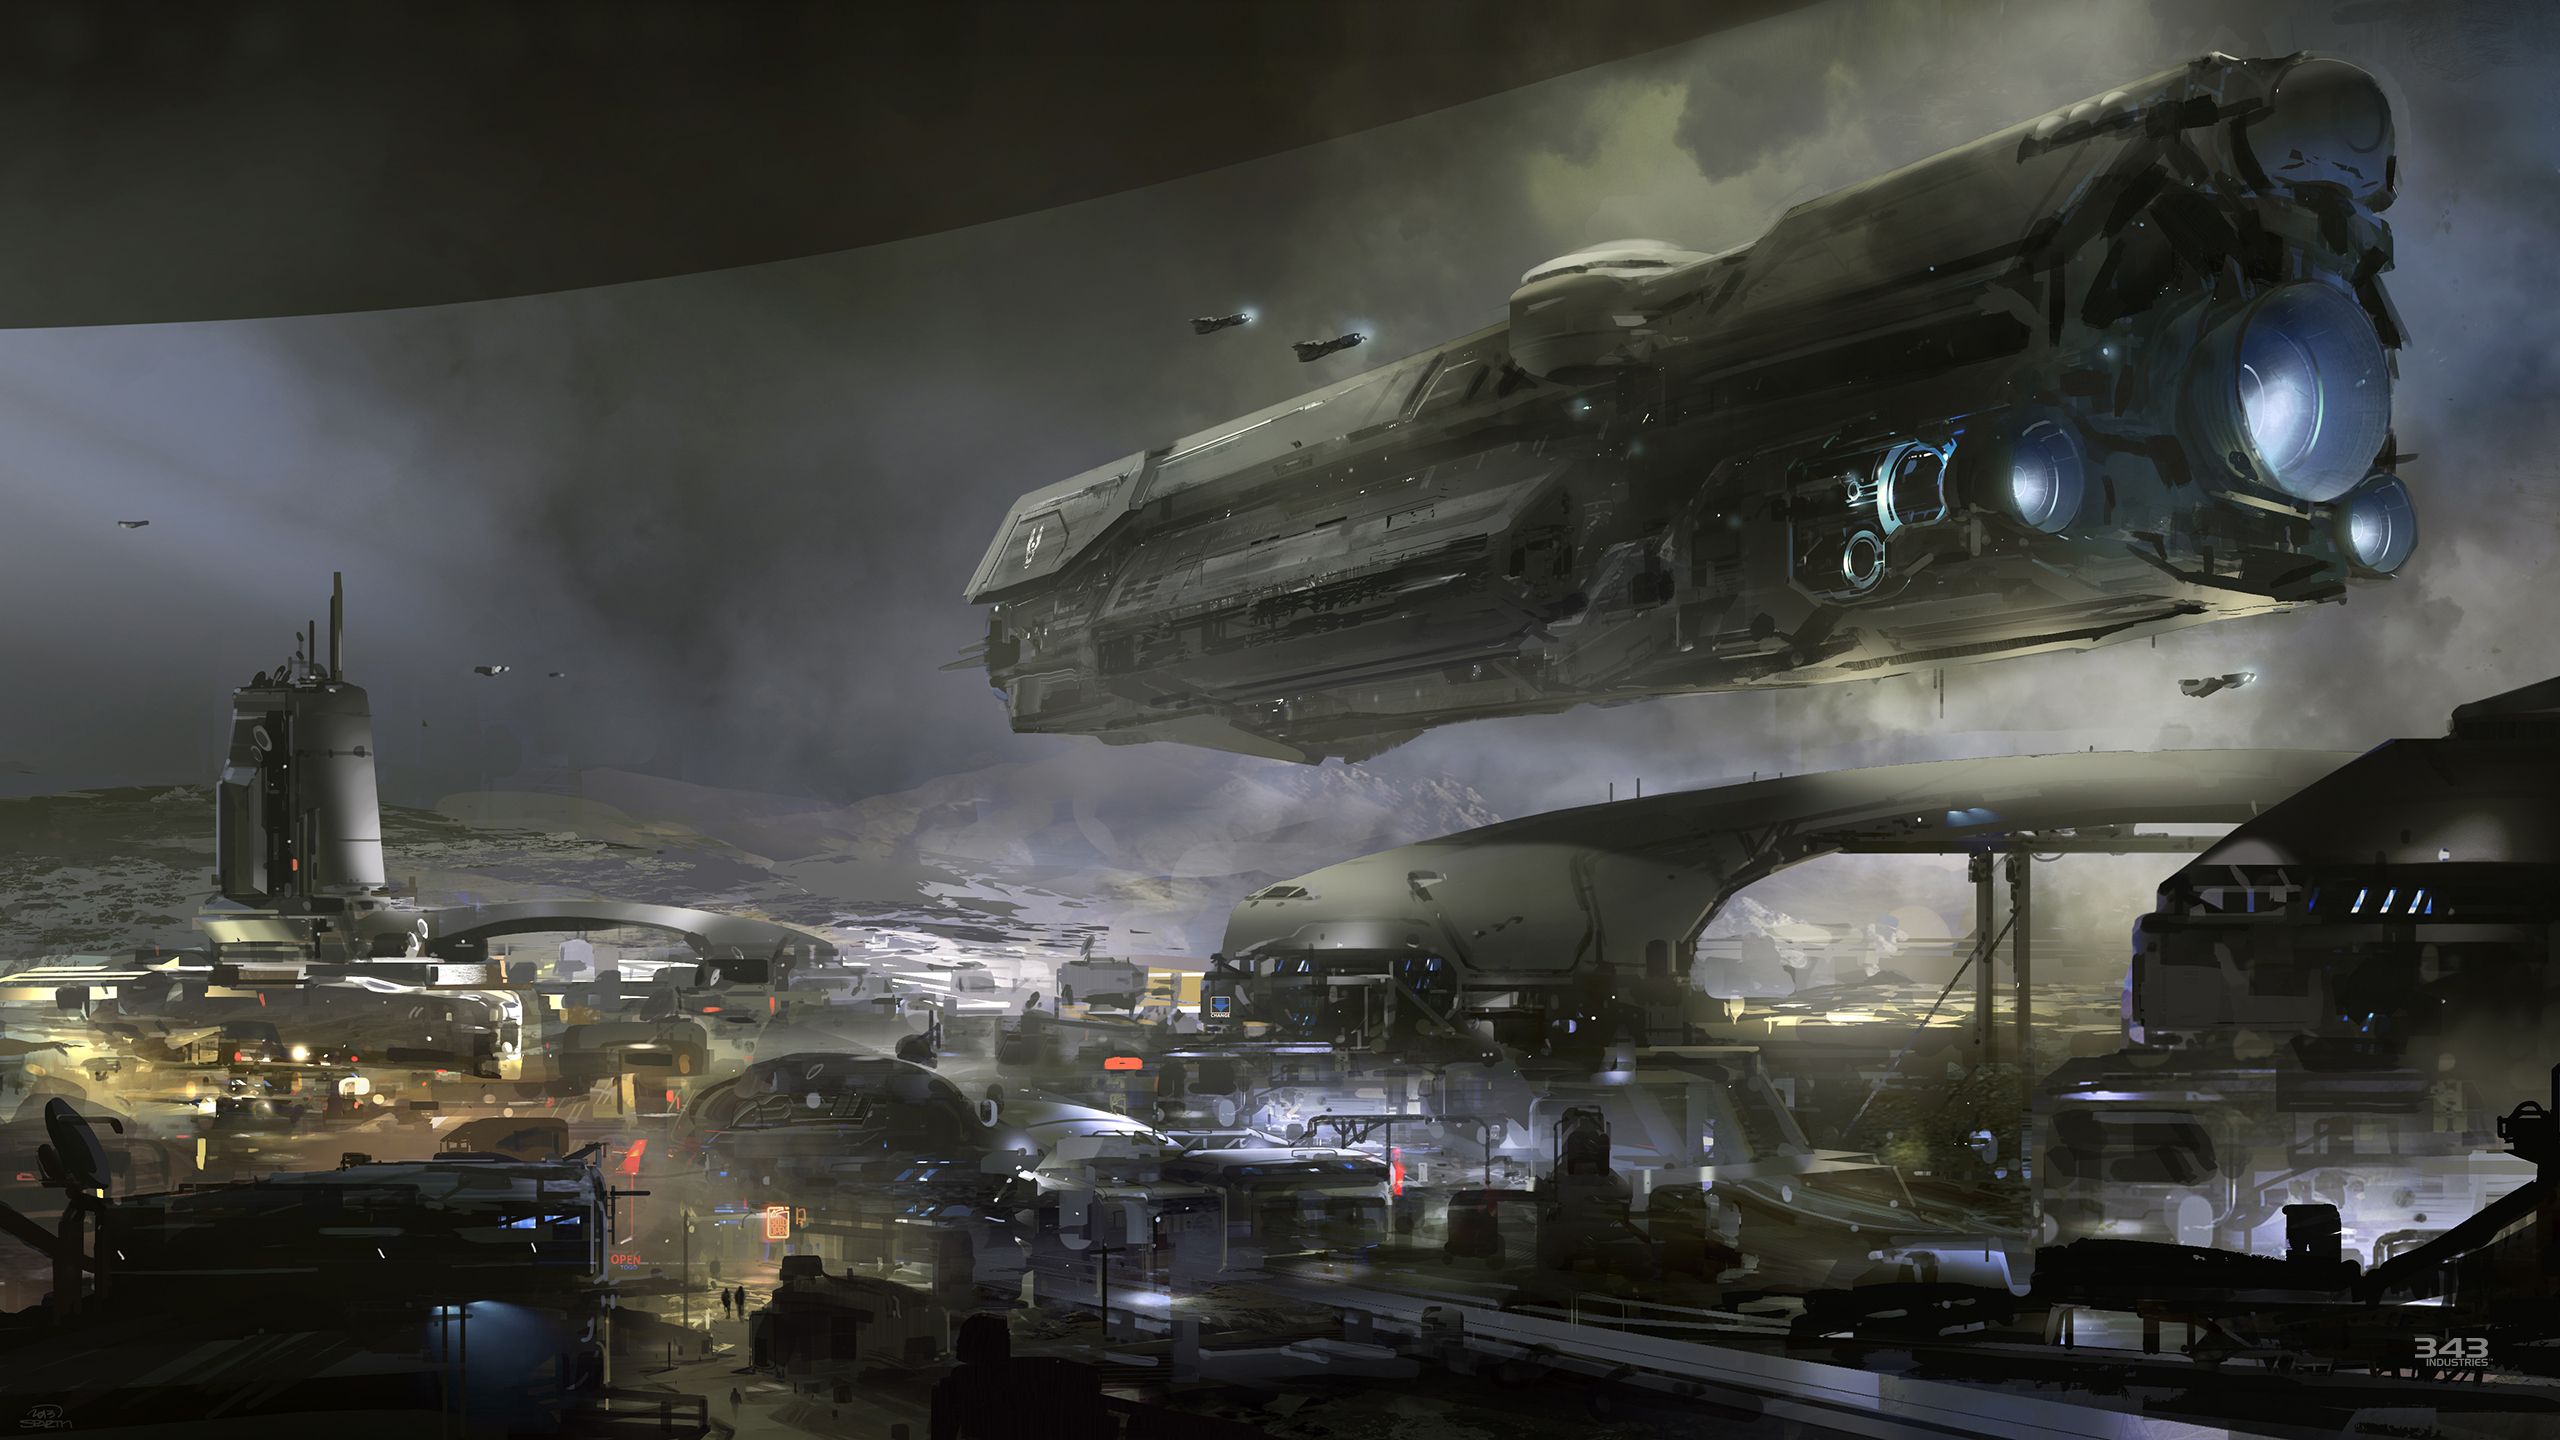  has shared a new concept artwork of the new Halo game for Xbox One